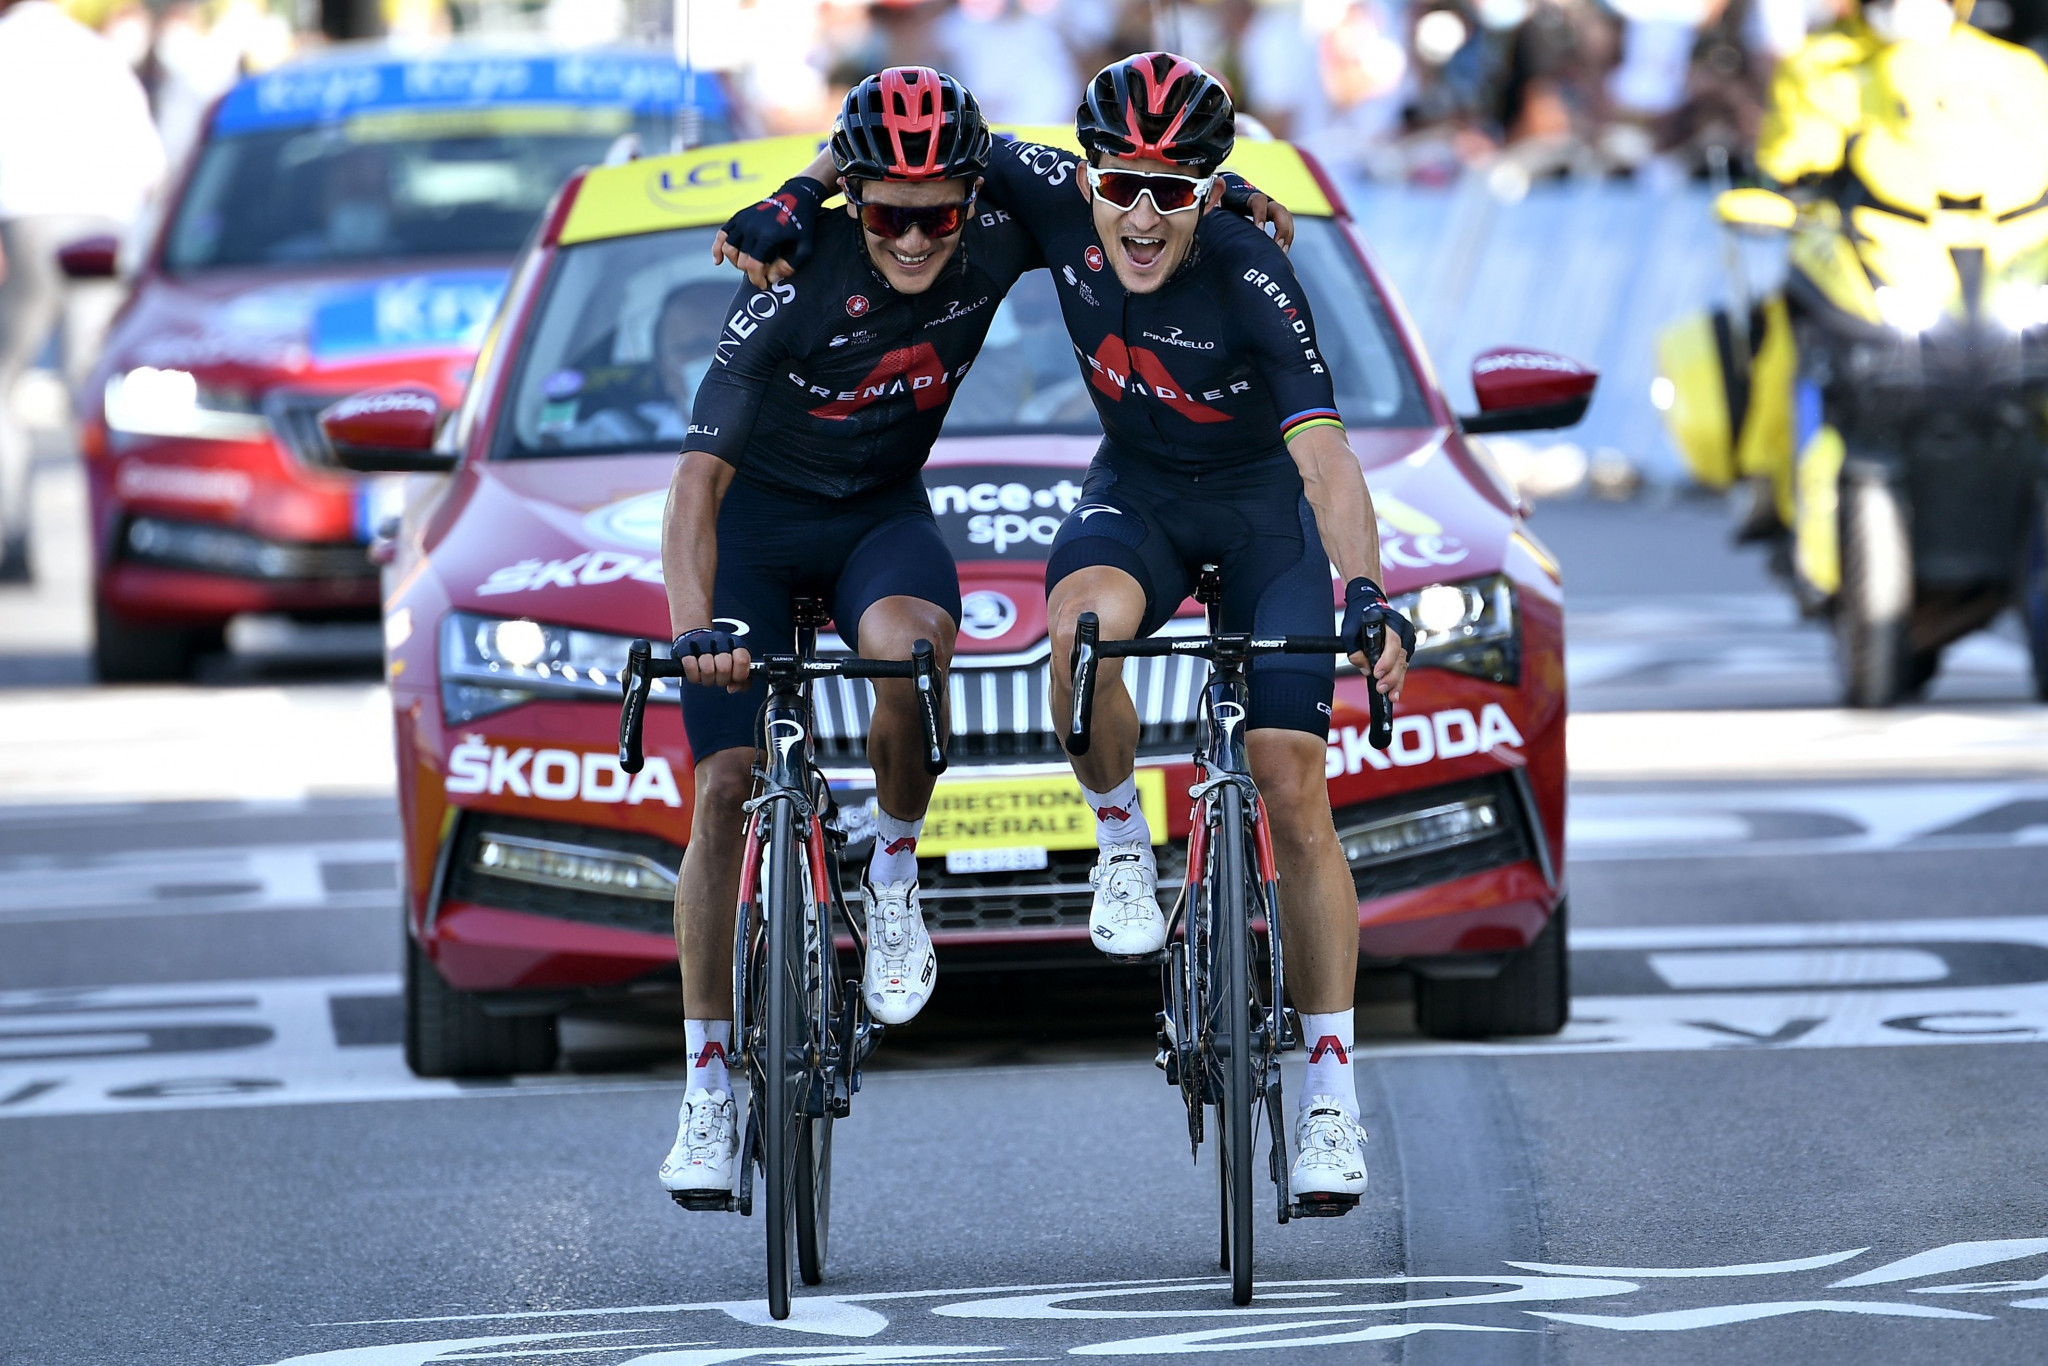 Kwiatkowski and Carapaz give Ineos Grenadiers boost on stage 18 of Tour de France